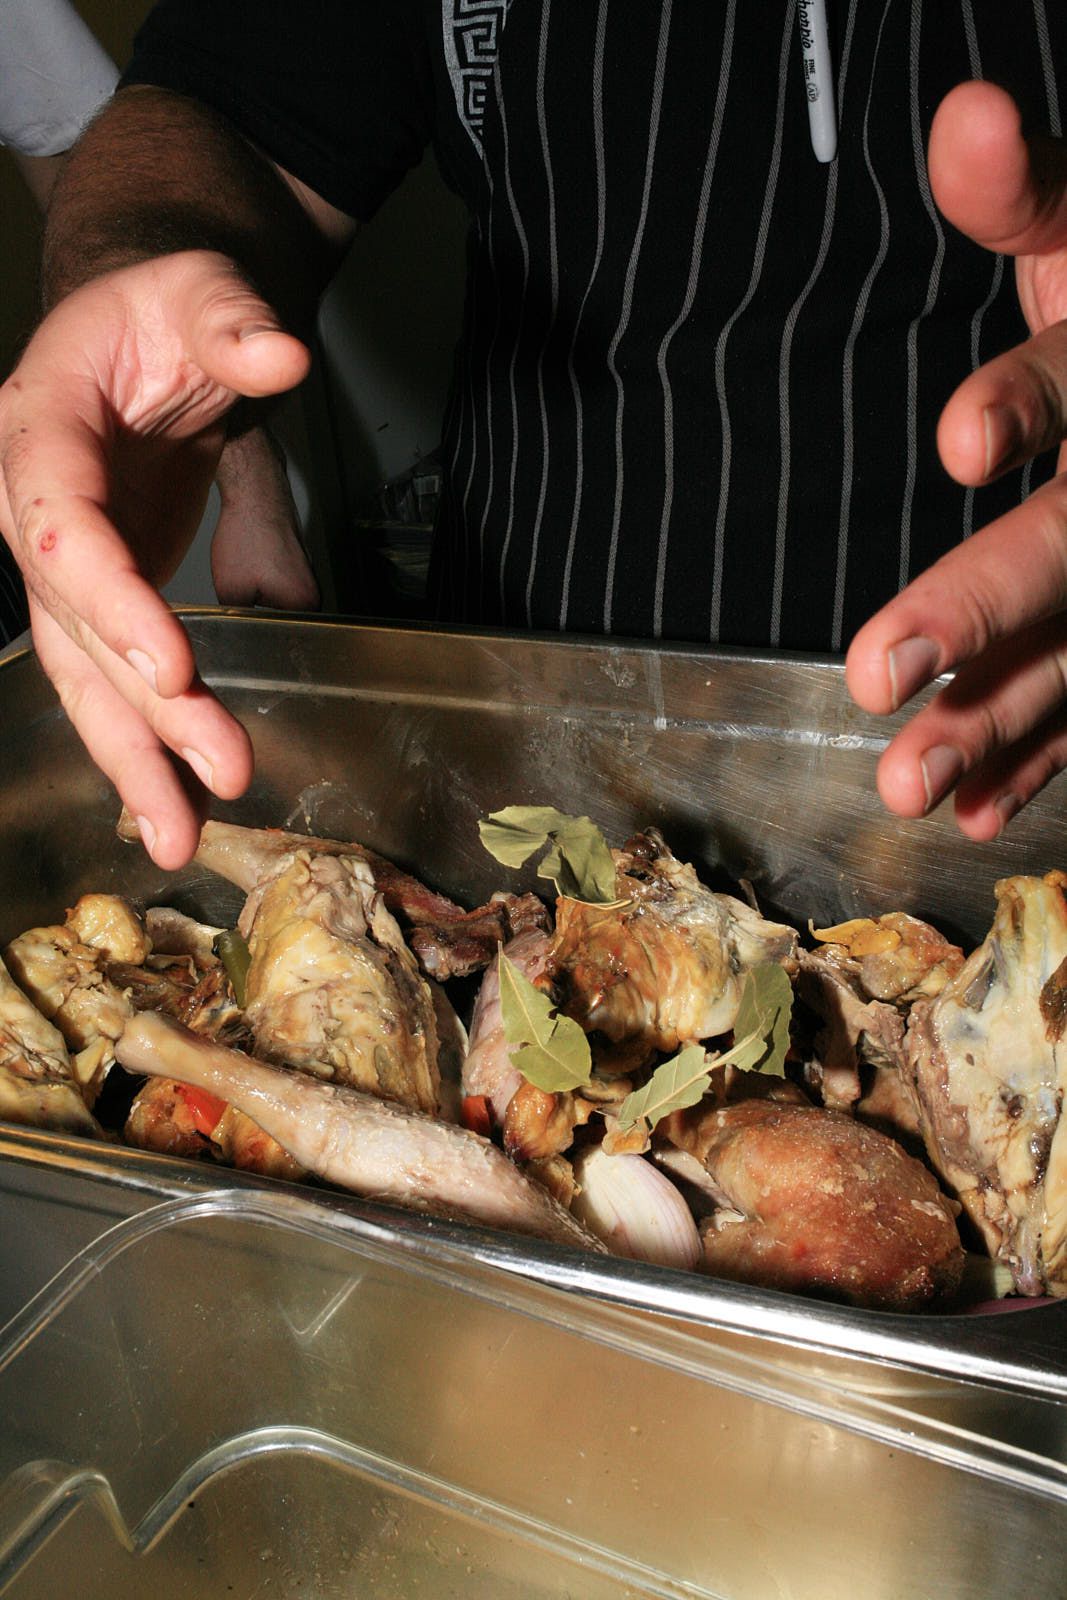 A closeup of a chef’s hands dropping bay leaves into a metal tray of roast duck legs and vegetables.